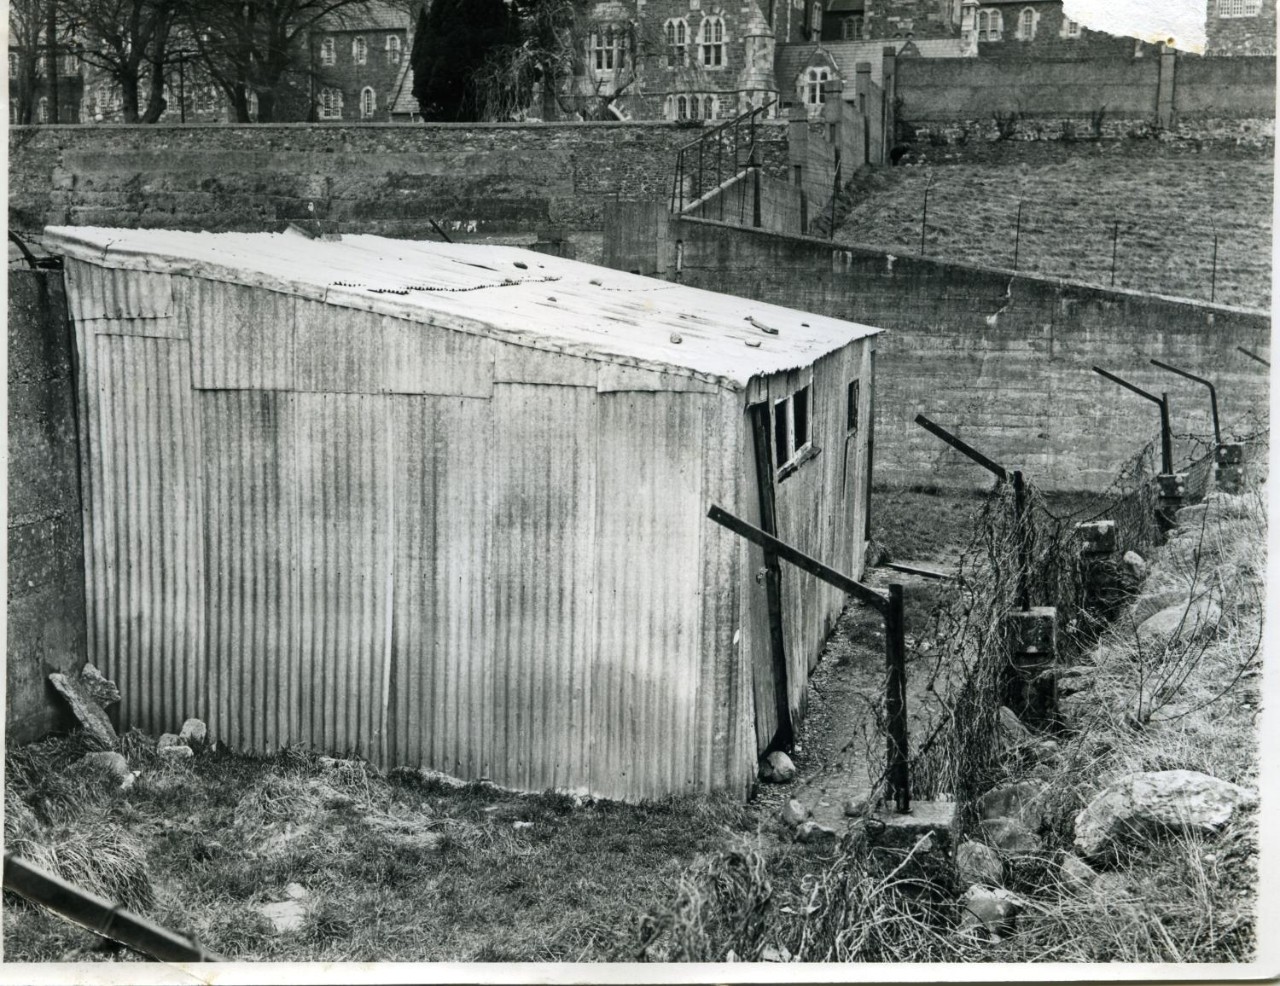 The old dressing rooms at Fitzgerald Stadium, Killarney, Co. Kerry. While these are a far cry from modern facilities, they represented a vast improvement to players more accustomed to togging out in nearby ditches.